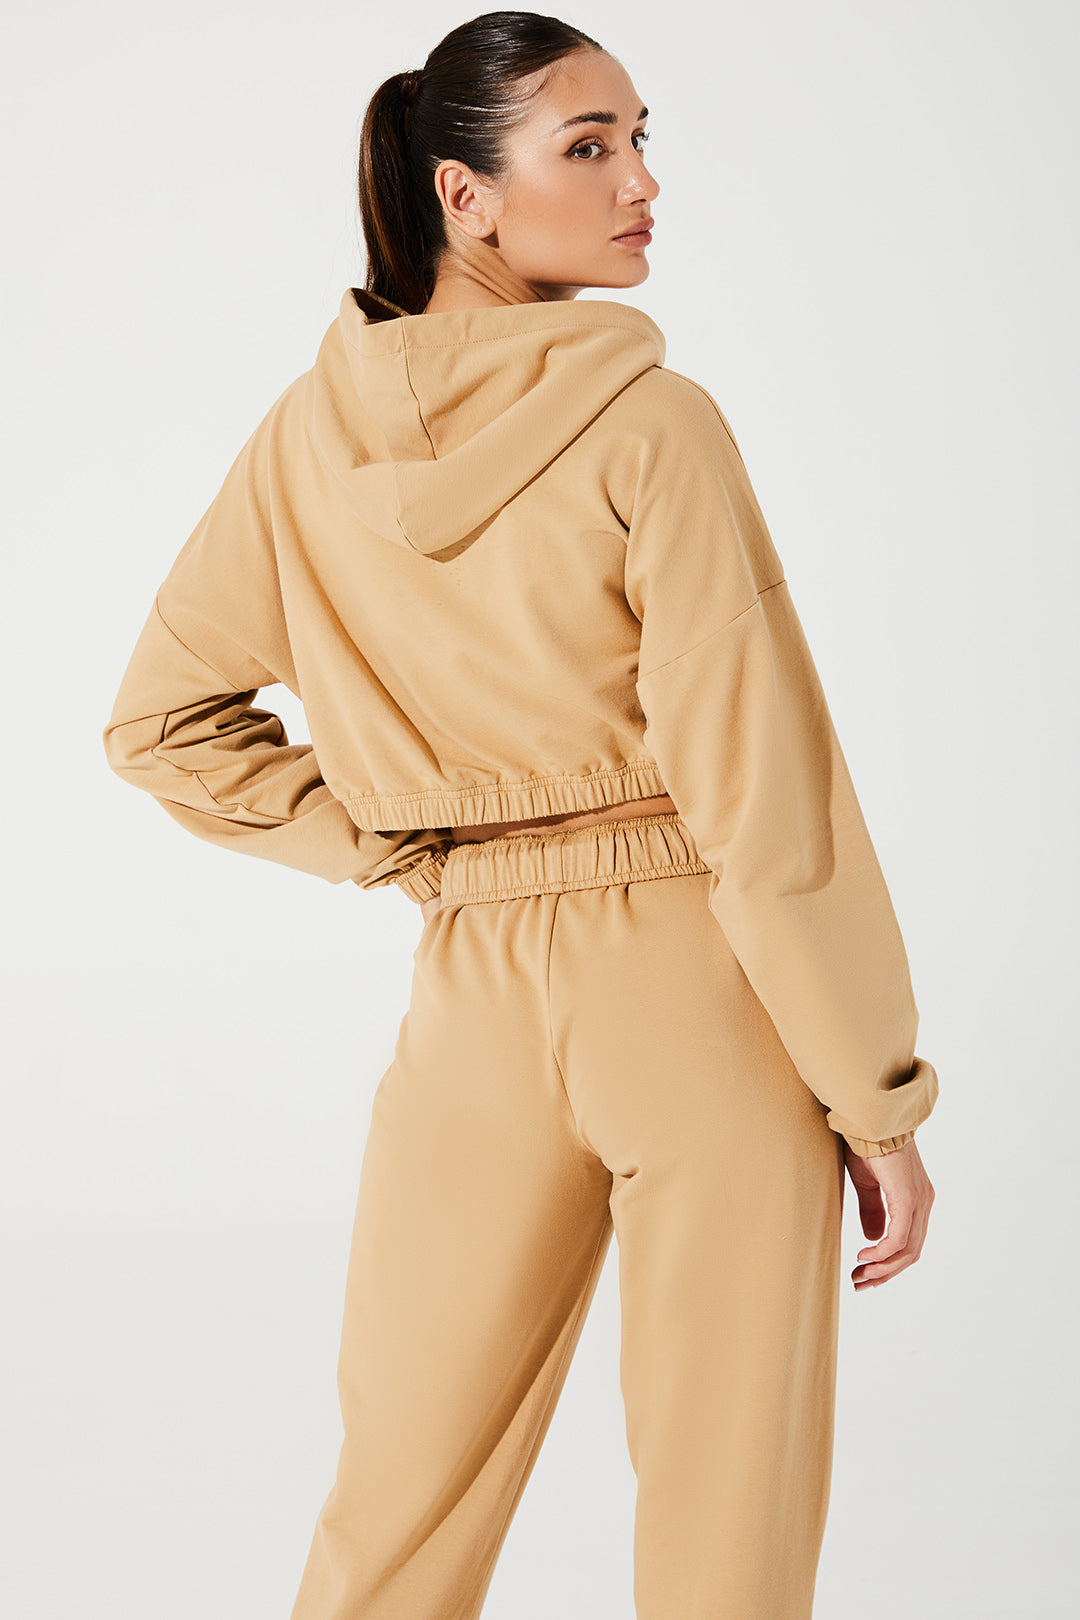 Janet wearing cappuccino beige women's sweatpants, comfortable and stylish, size 4, OW-0036-WSW-BG.